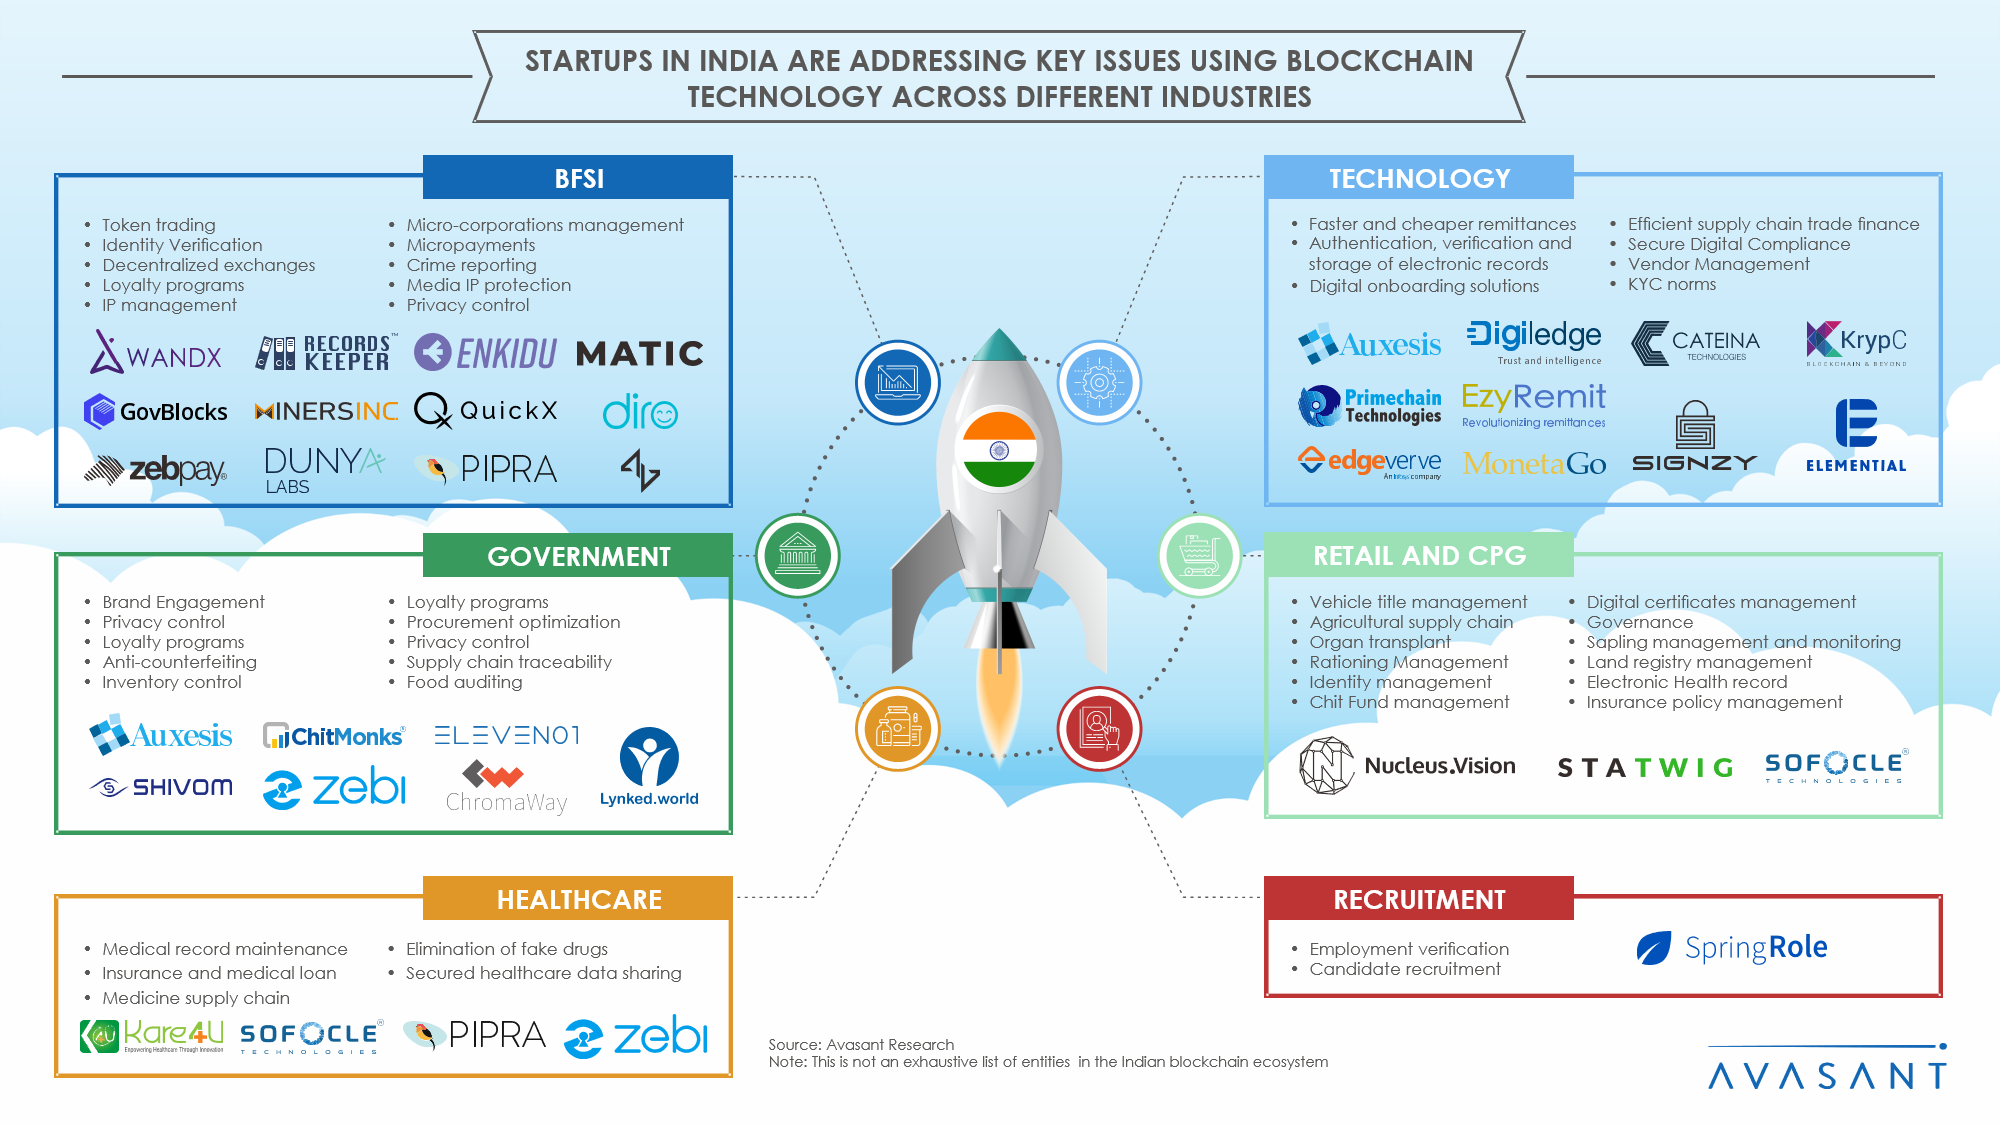 firms investng in blockchain startups in india